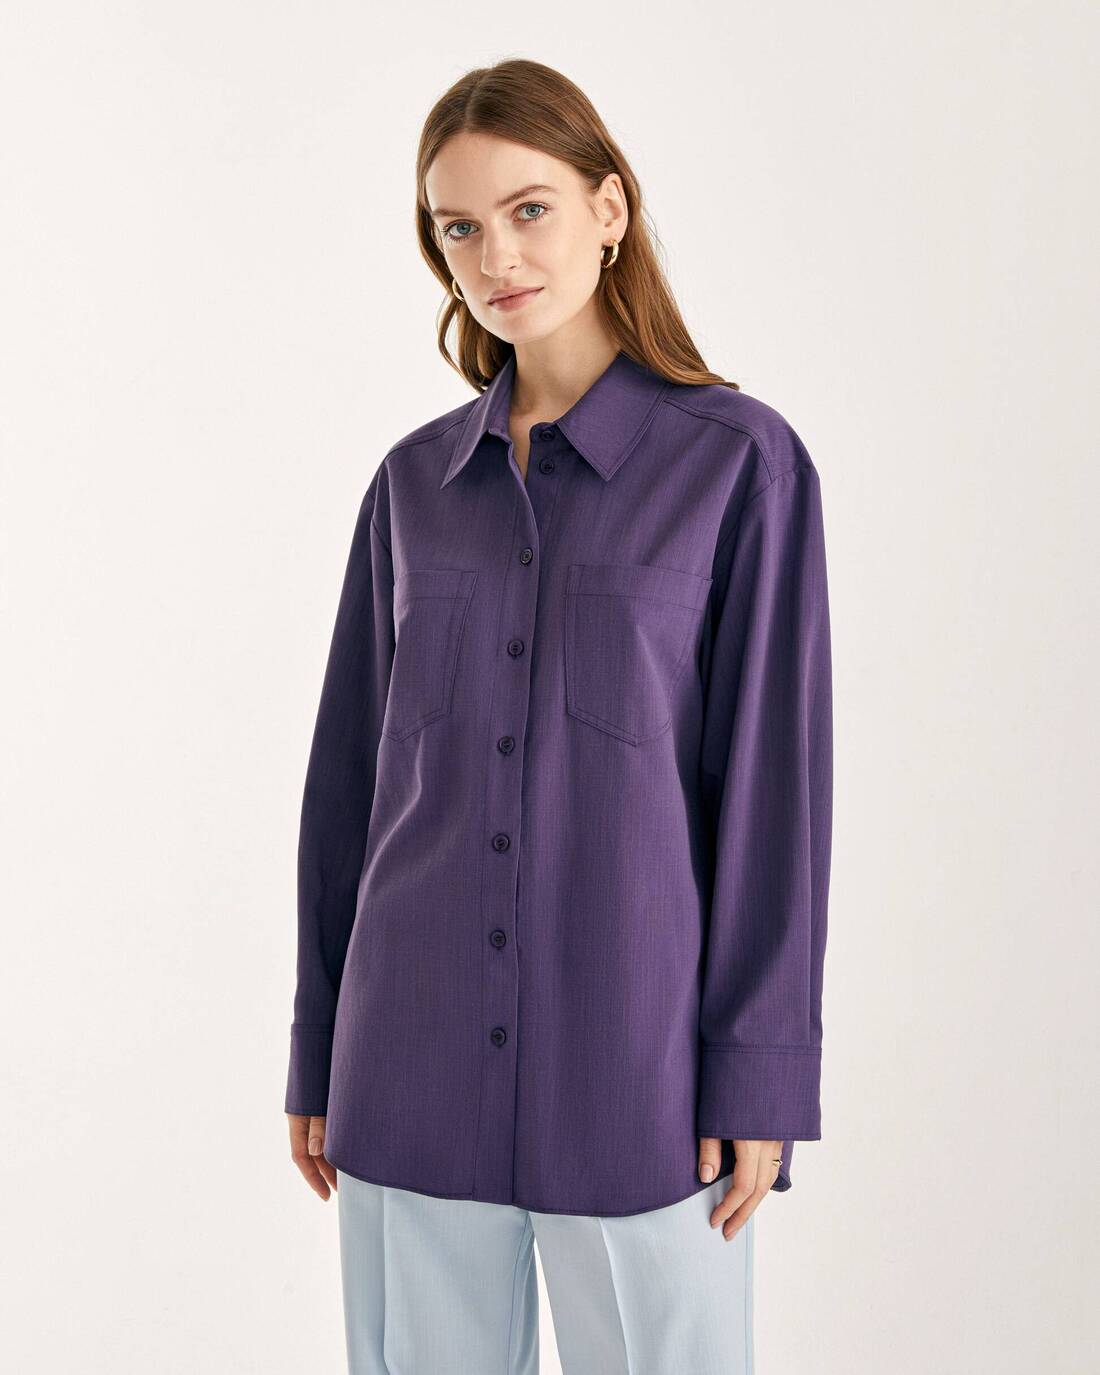 Oversized shirt with chest pockets